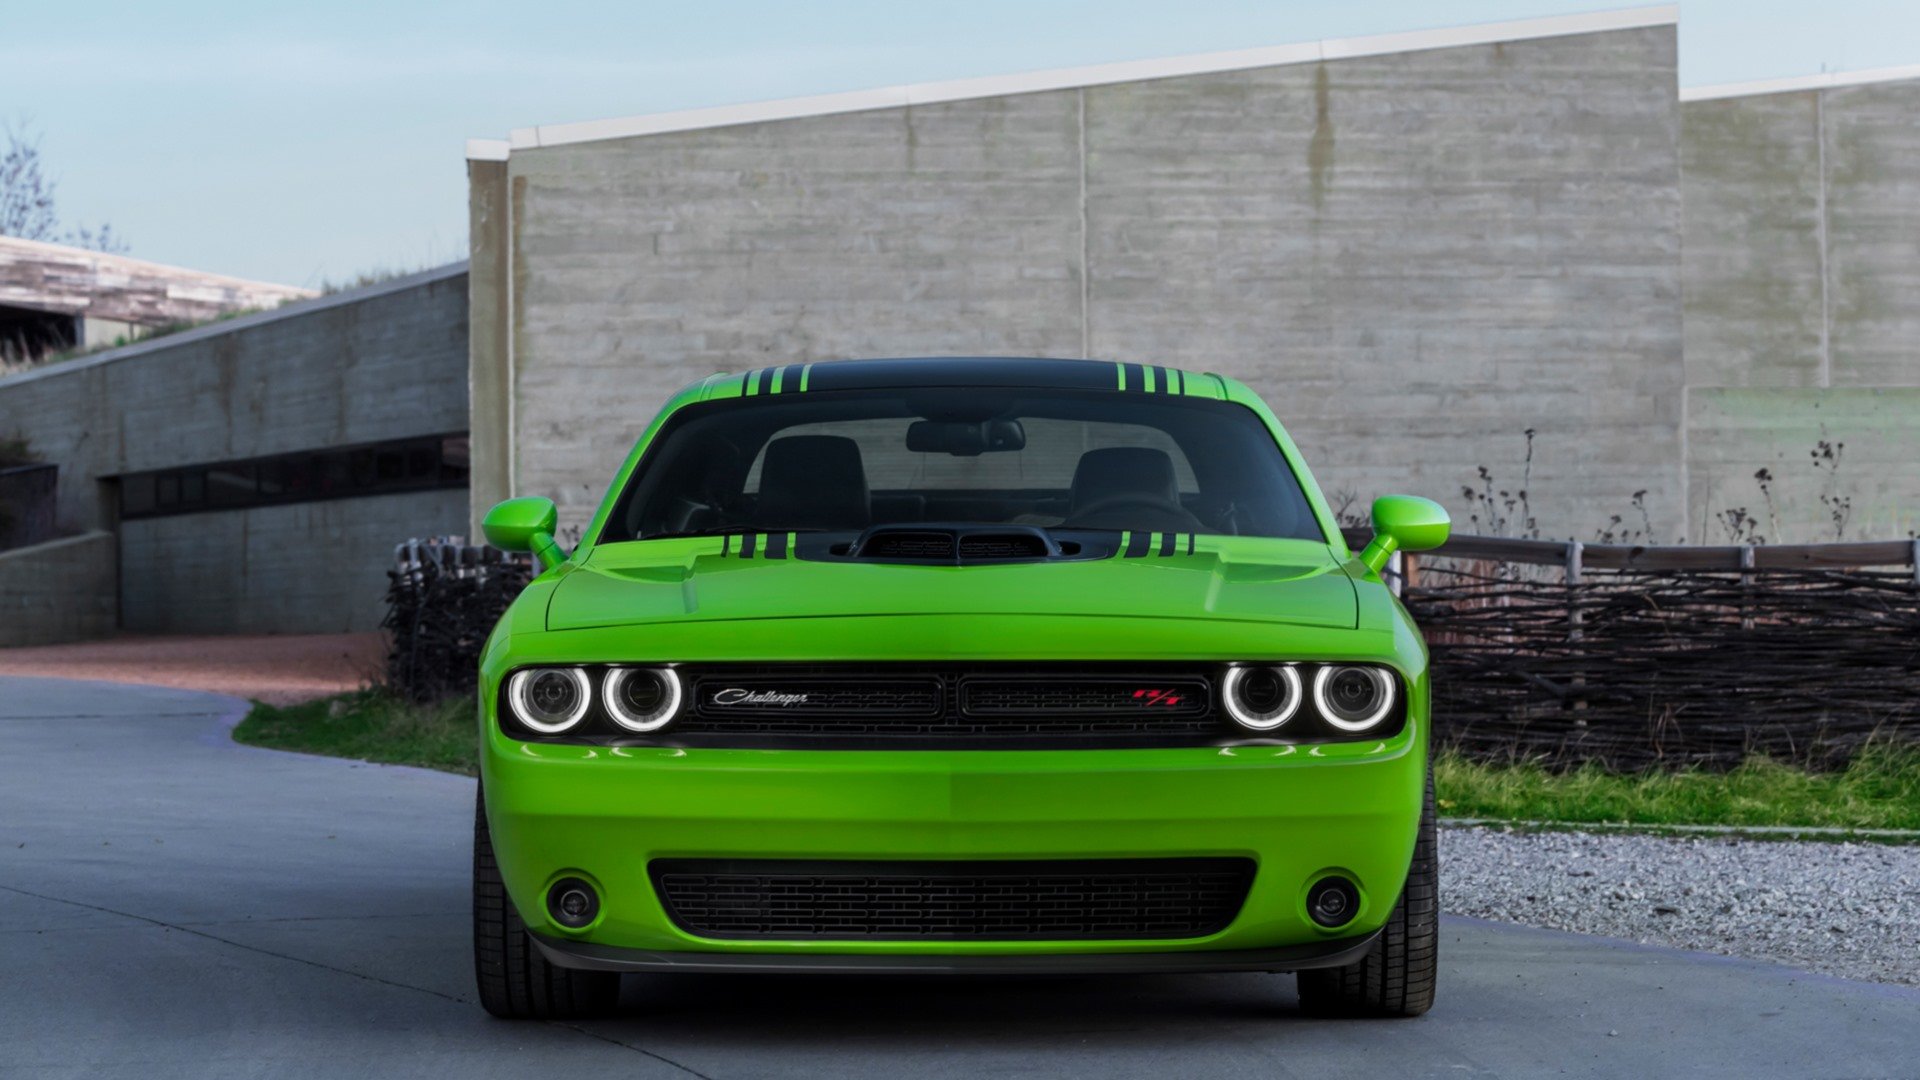 Best Dodge Challenger wallpaper ID:231818 for High Resolution hd 1920x1080 PC